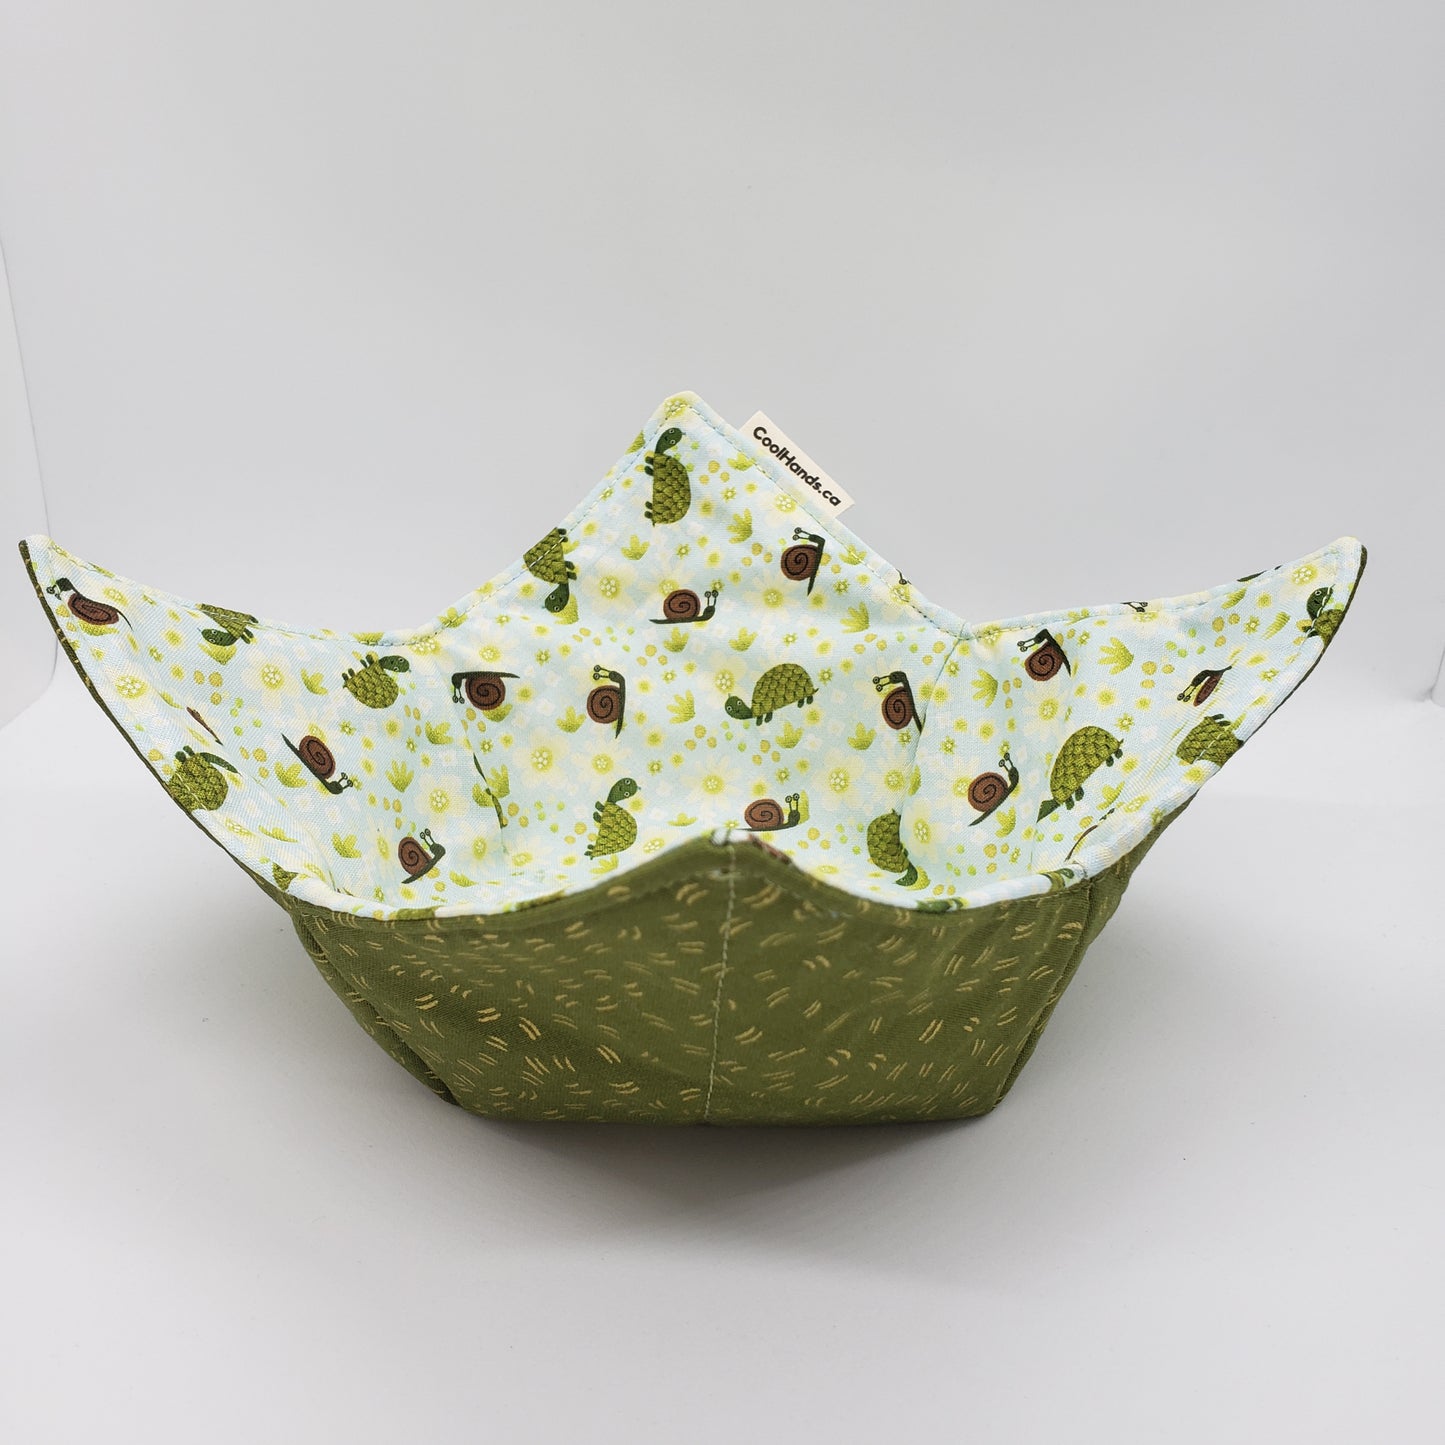 100% Cotton Microwavable Bowl Cozy - "Slow and Steady"